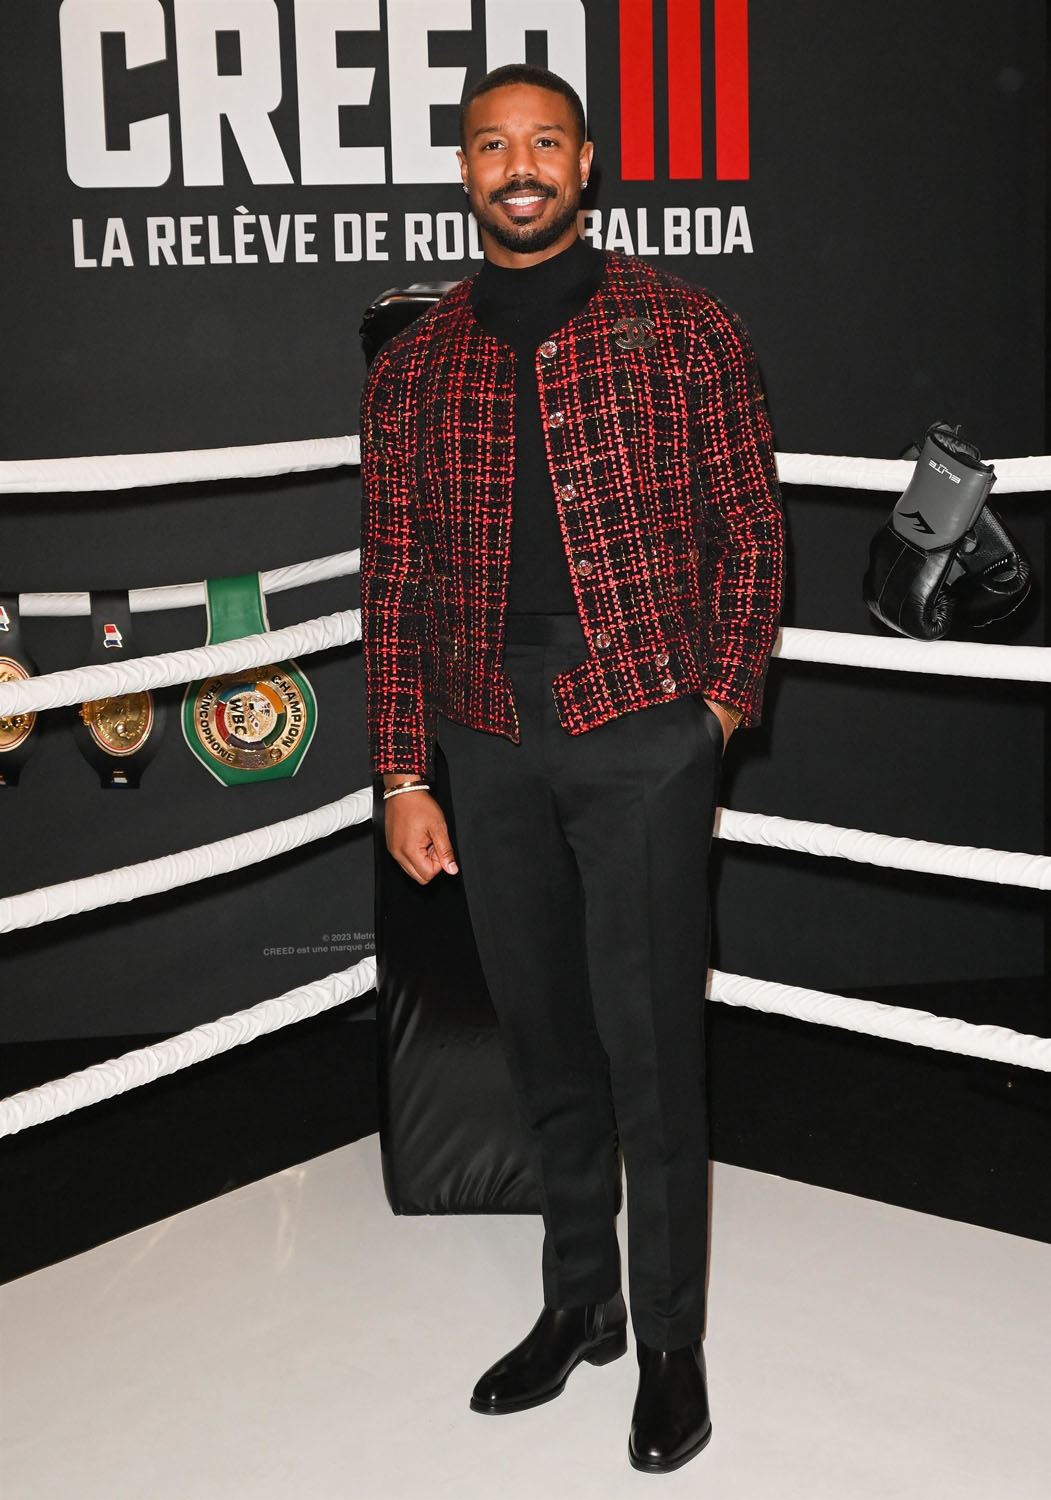 Michael B Jordan promotes Creed III in Paris in Chanel and there